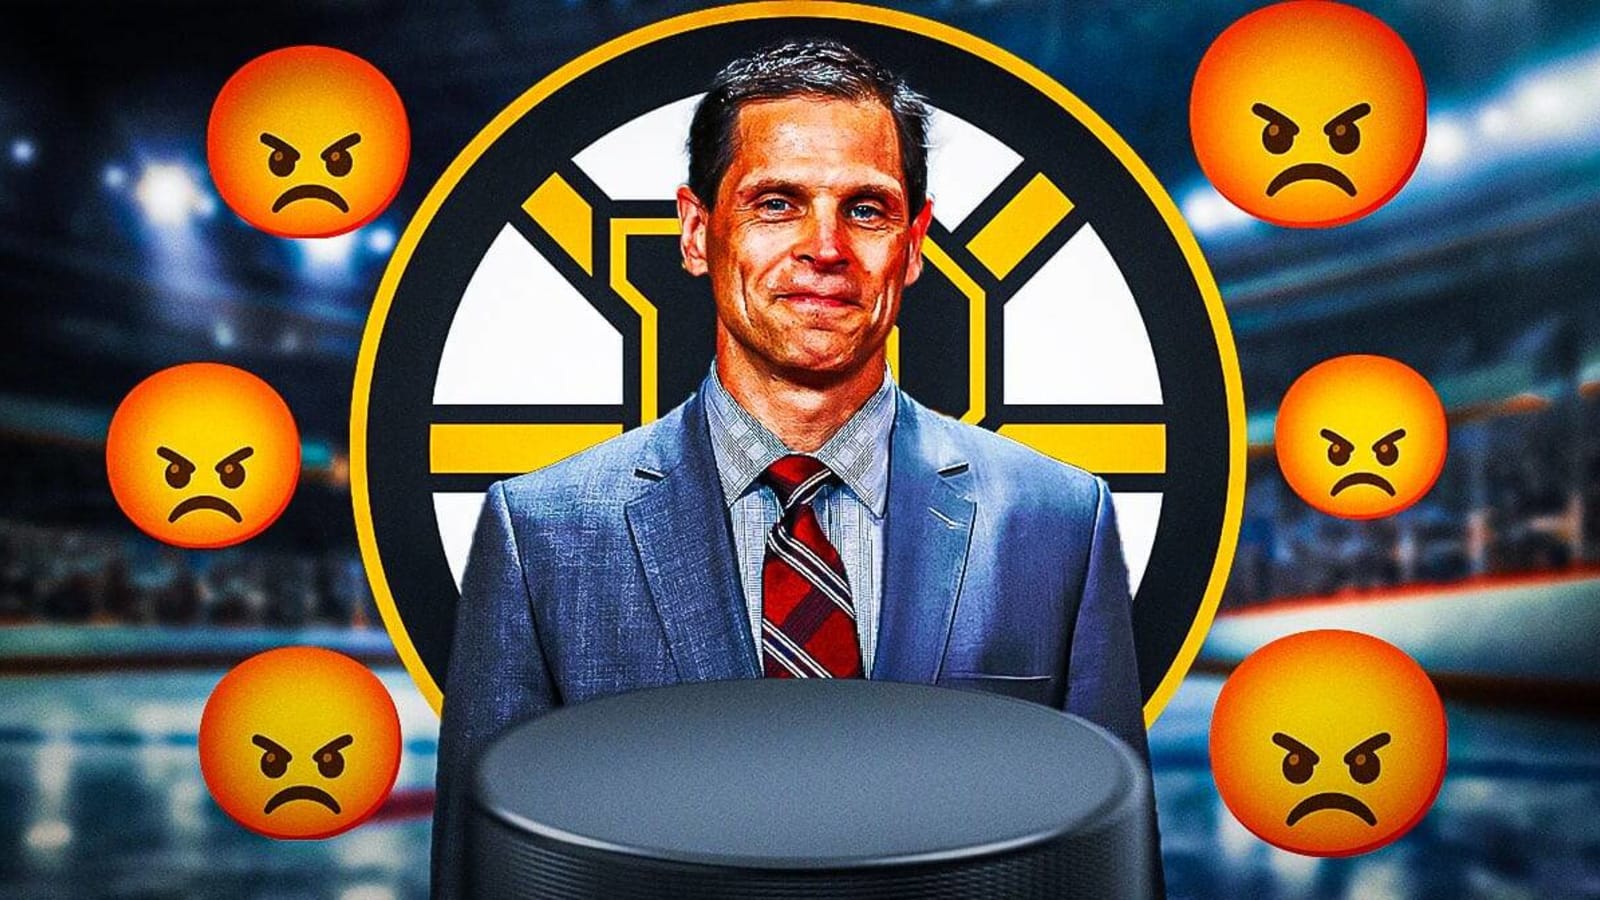 Bruins’ Don Sweeney goes scorched earth on NHL, officiating after controversial Game 4 loss